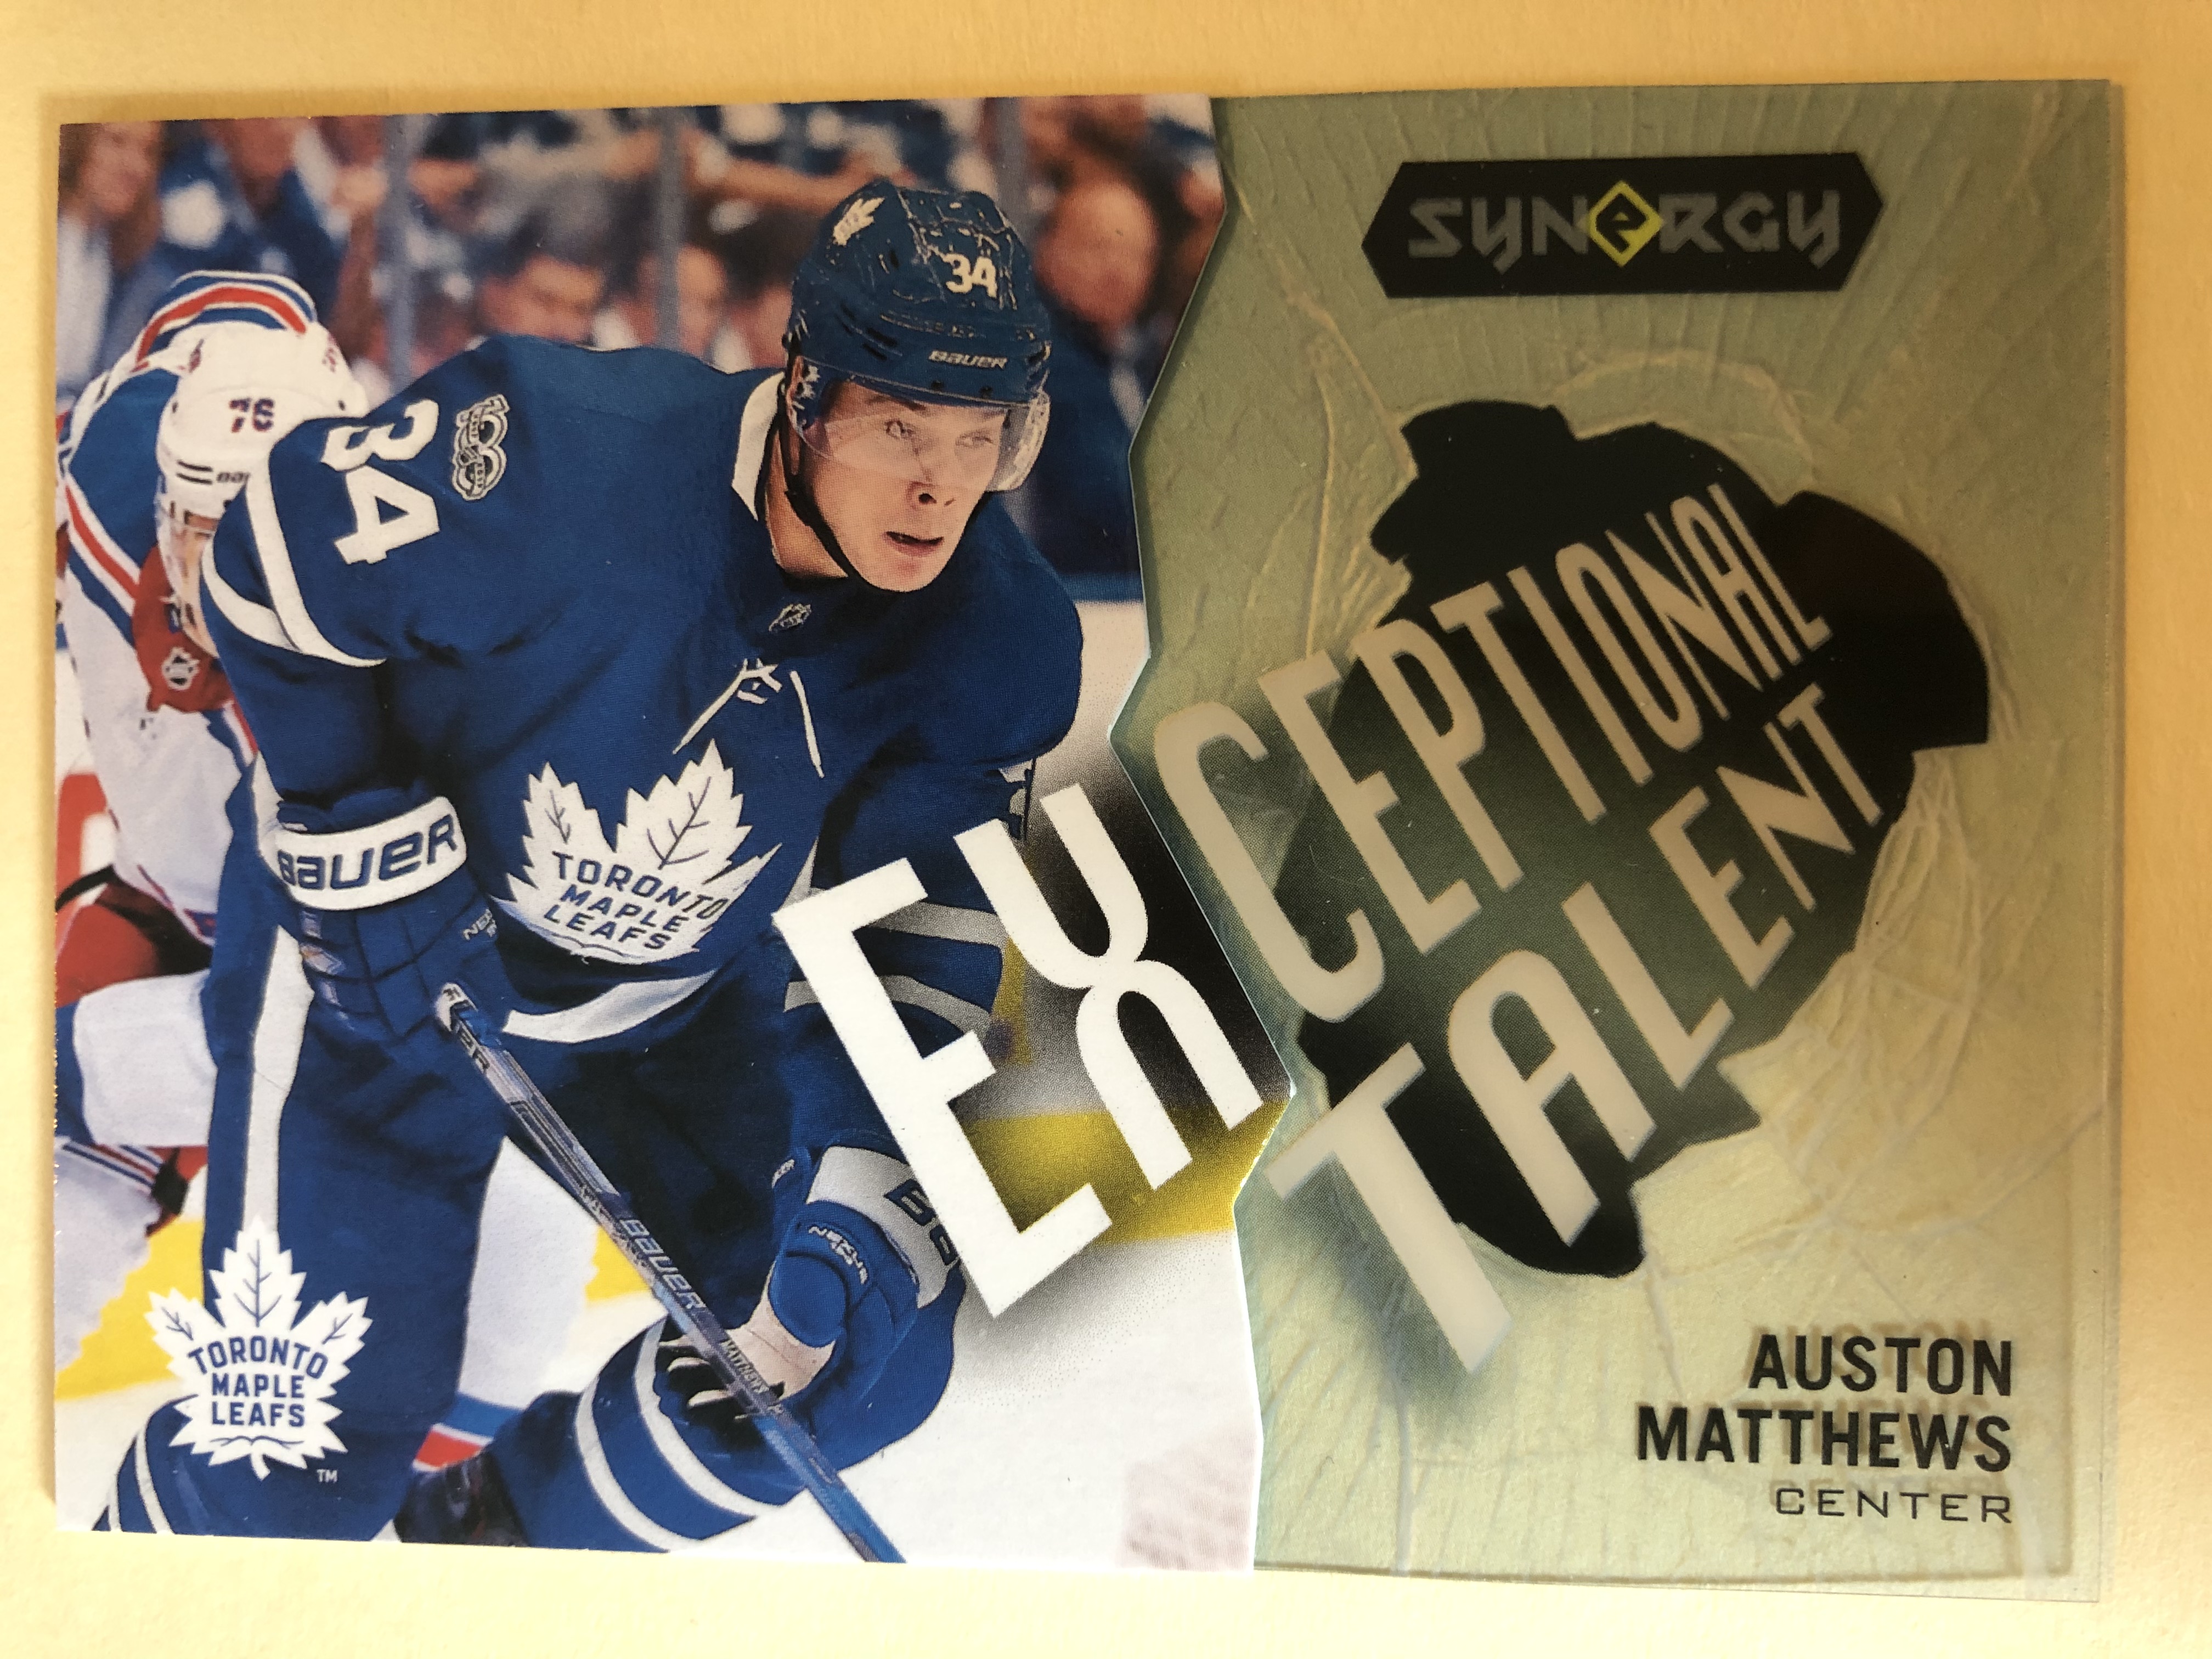 2017-18 Upper Deck Synergy Exceptional Talent #ET-39 Auston Matthews Toronto Maple Leafs  Official UD Hockey Trading Card